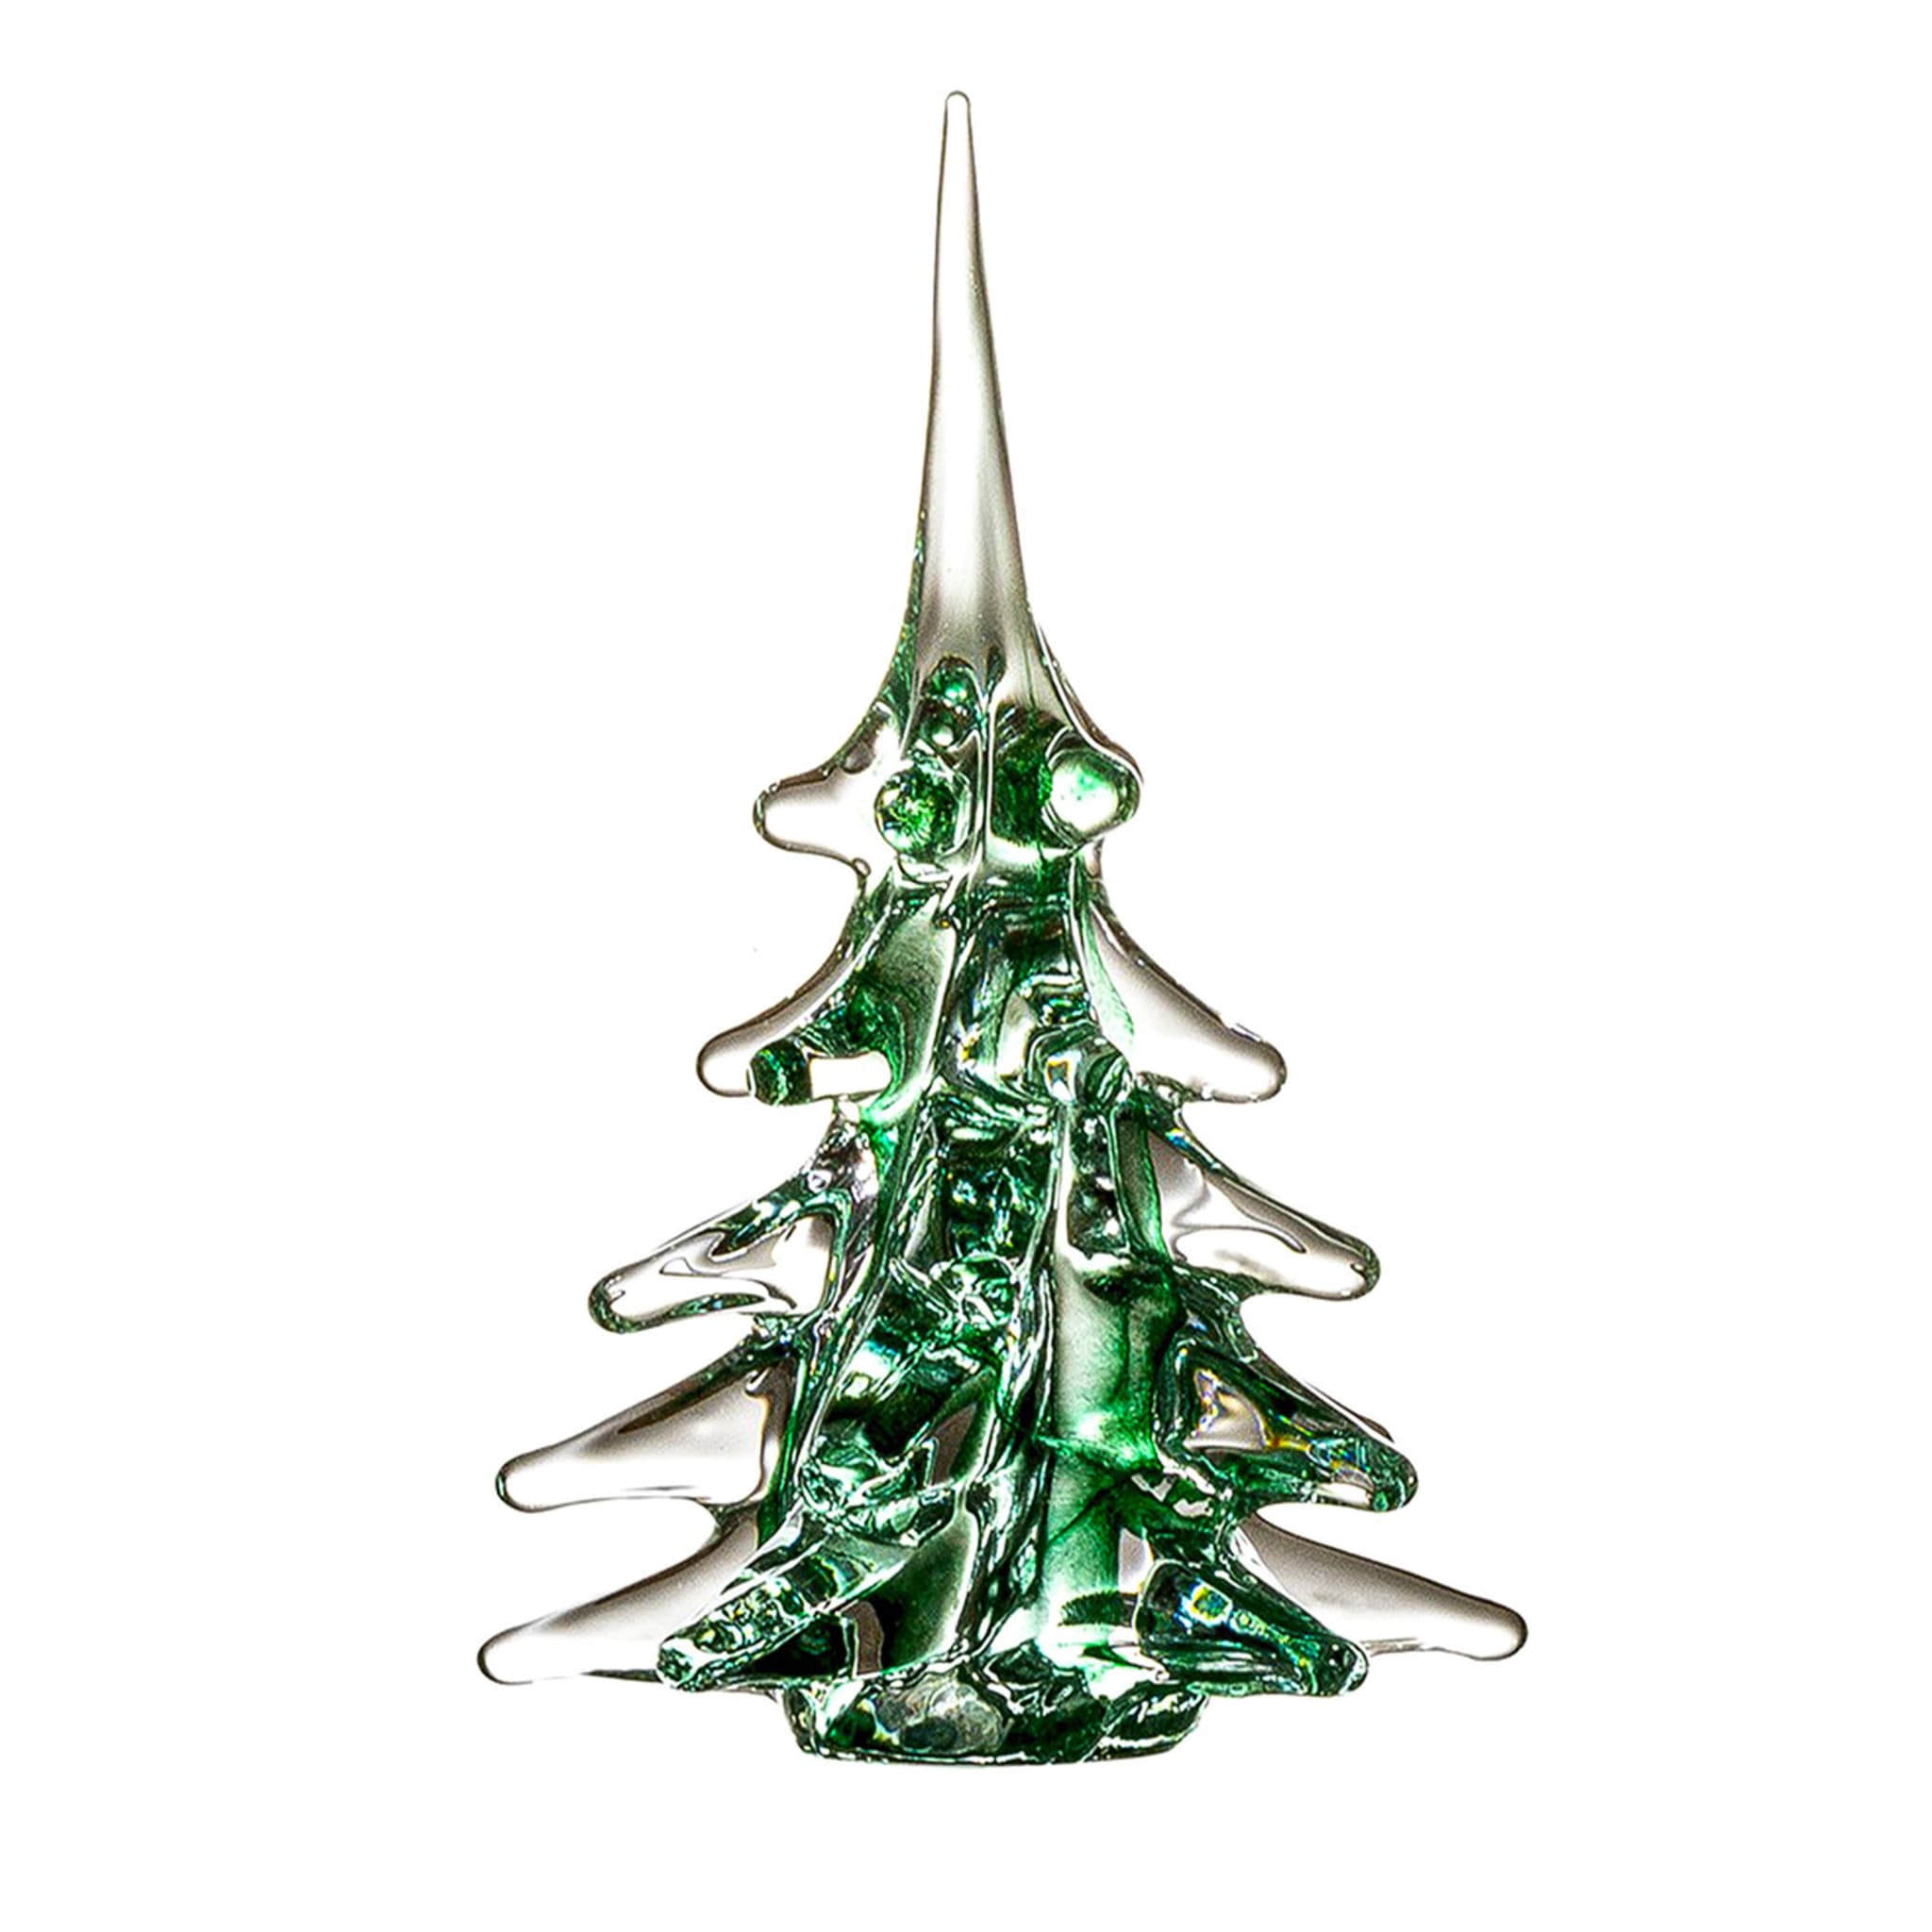 Extra-Tall Green Christmas Tree Ornament by Marcolin - Main view